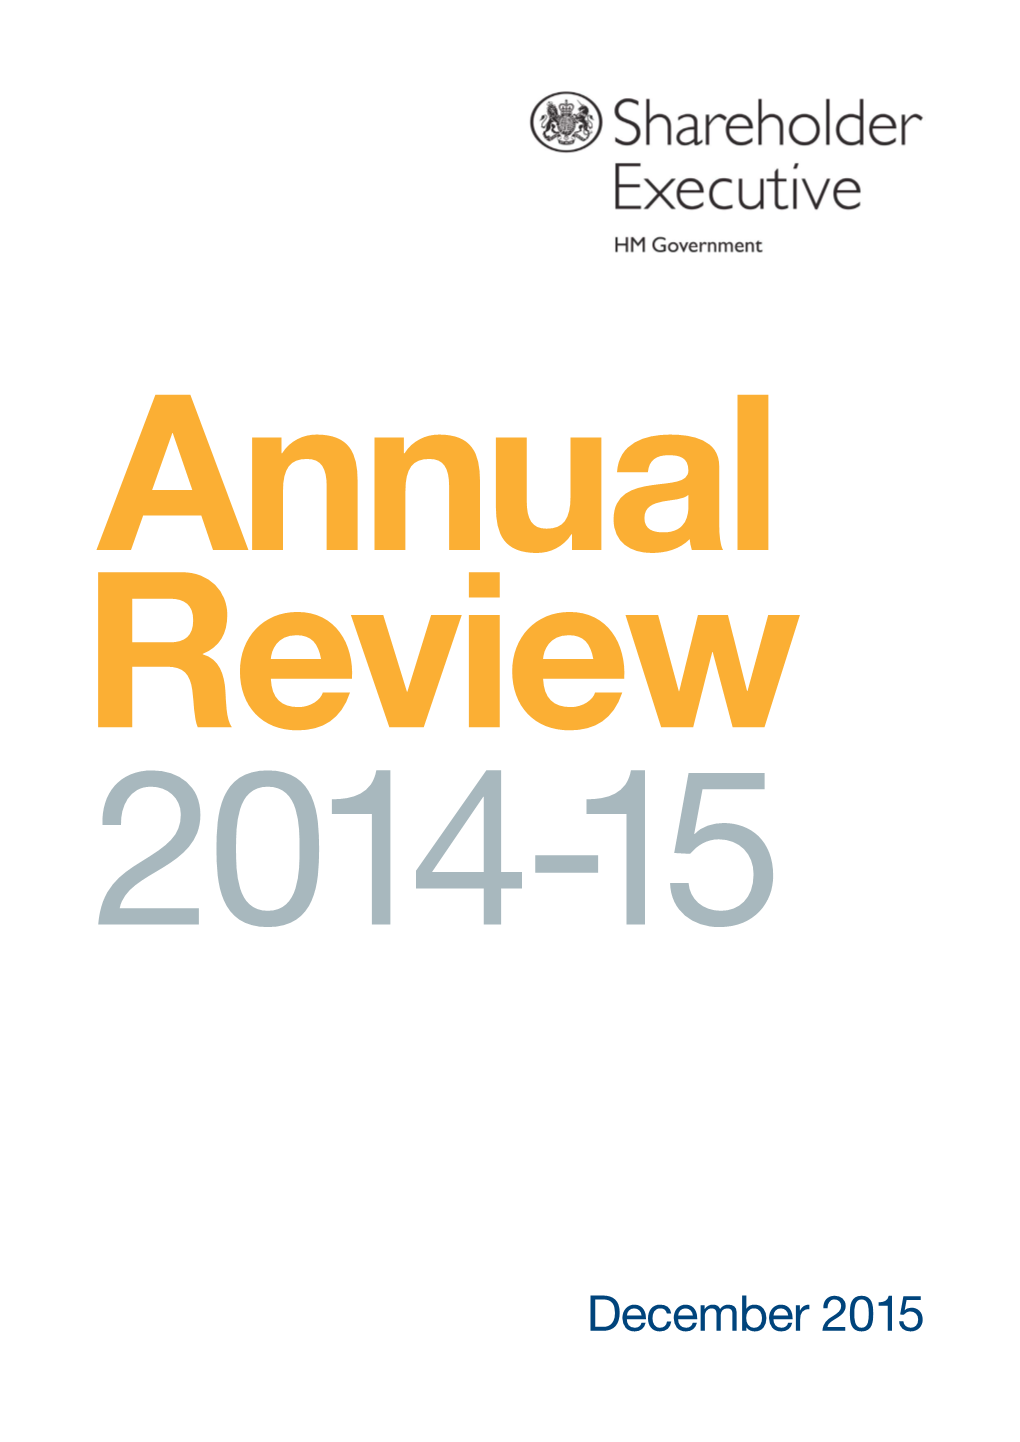 Shareholder Executive Annual Review 2014-15